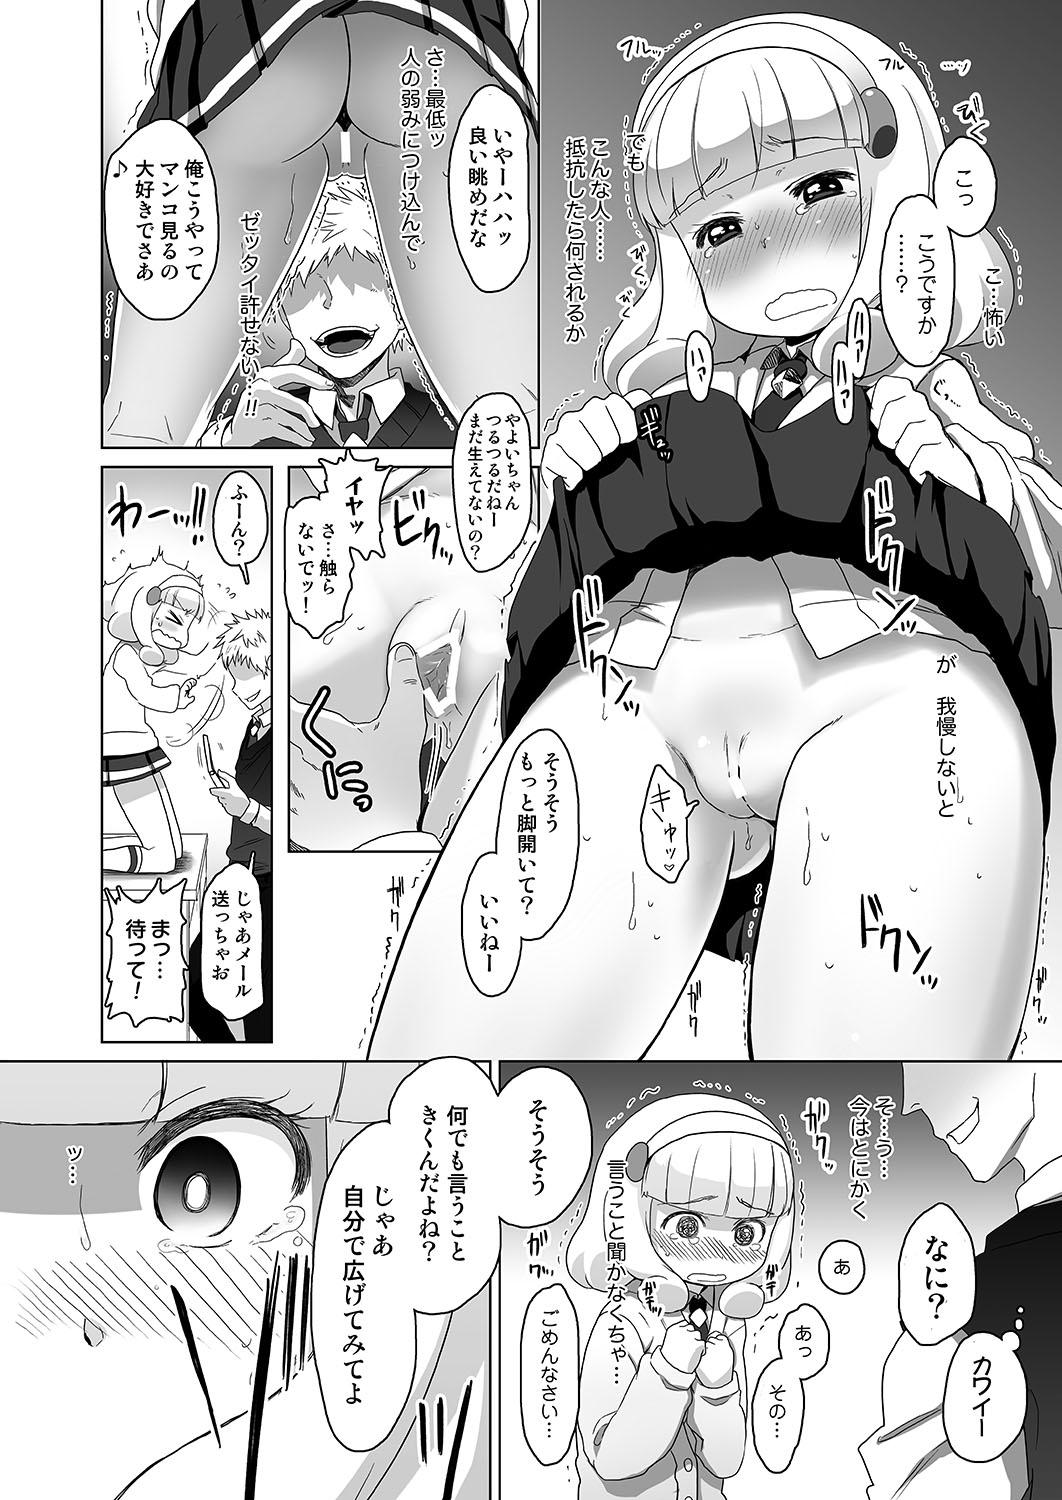 Sissy SMILE FOR YOU 1 - Smile precure Culo Grande - Page 5